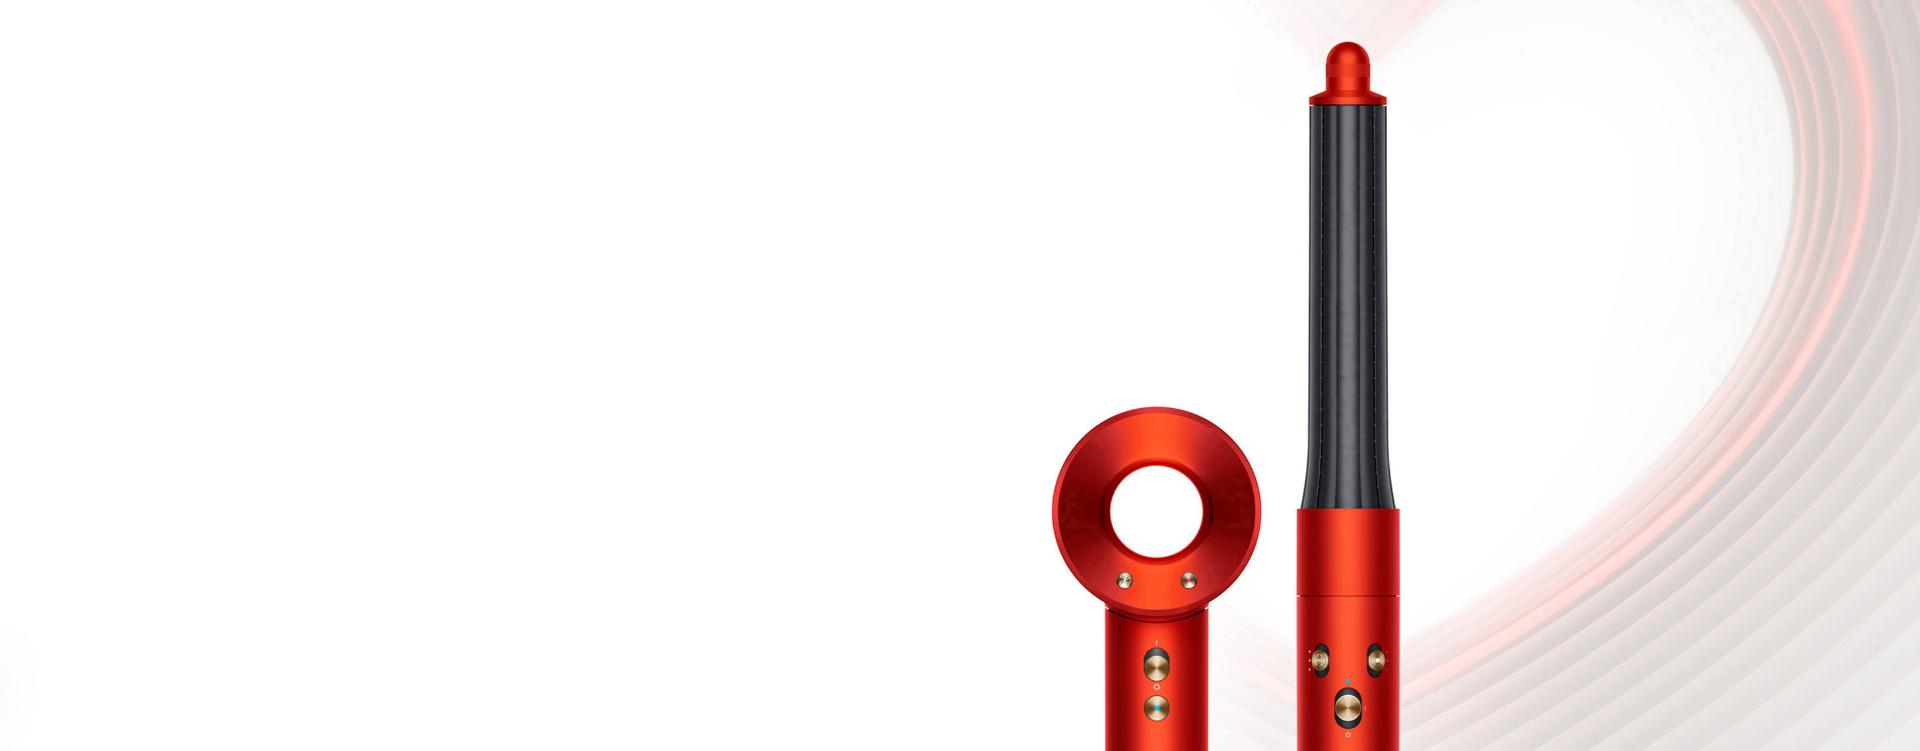 Dyson Supersonic and Dyson Airwrap Complete Long in Topaz orange, on a heart-design background.